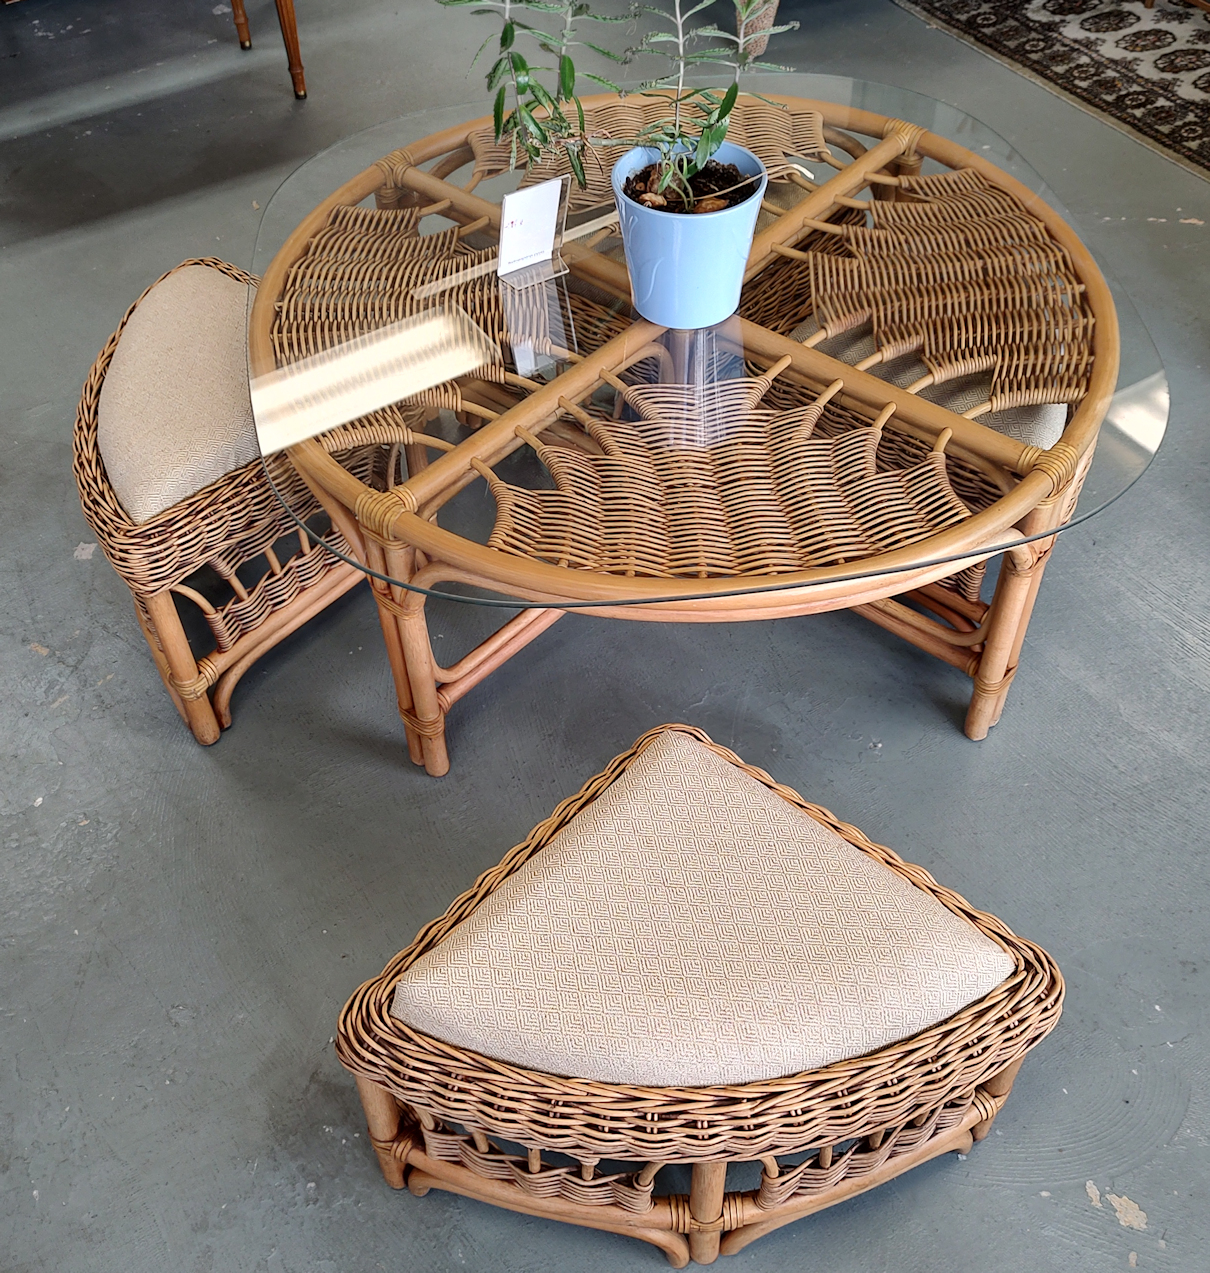 LR0642-natural-wicker-round-table-4stools